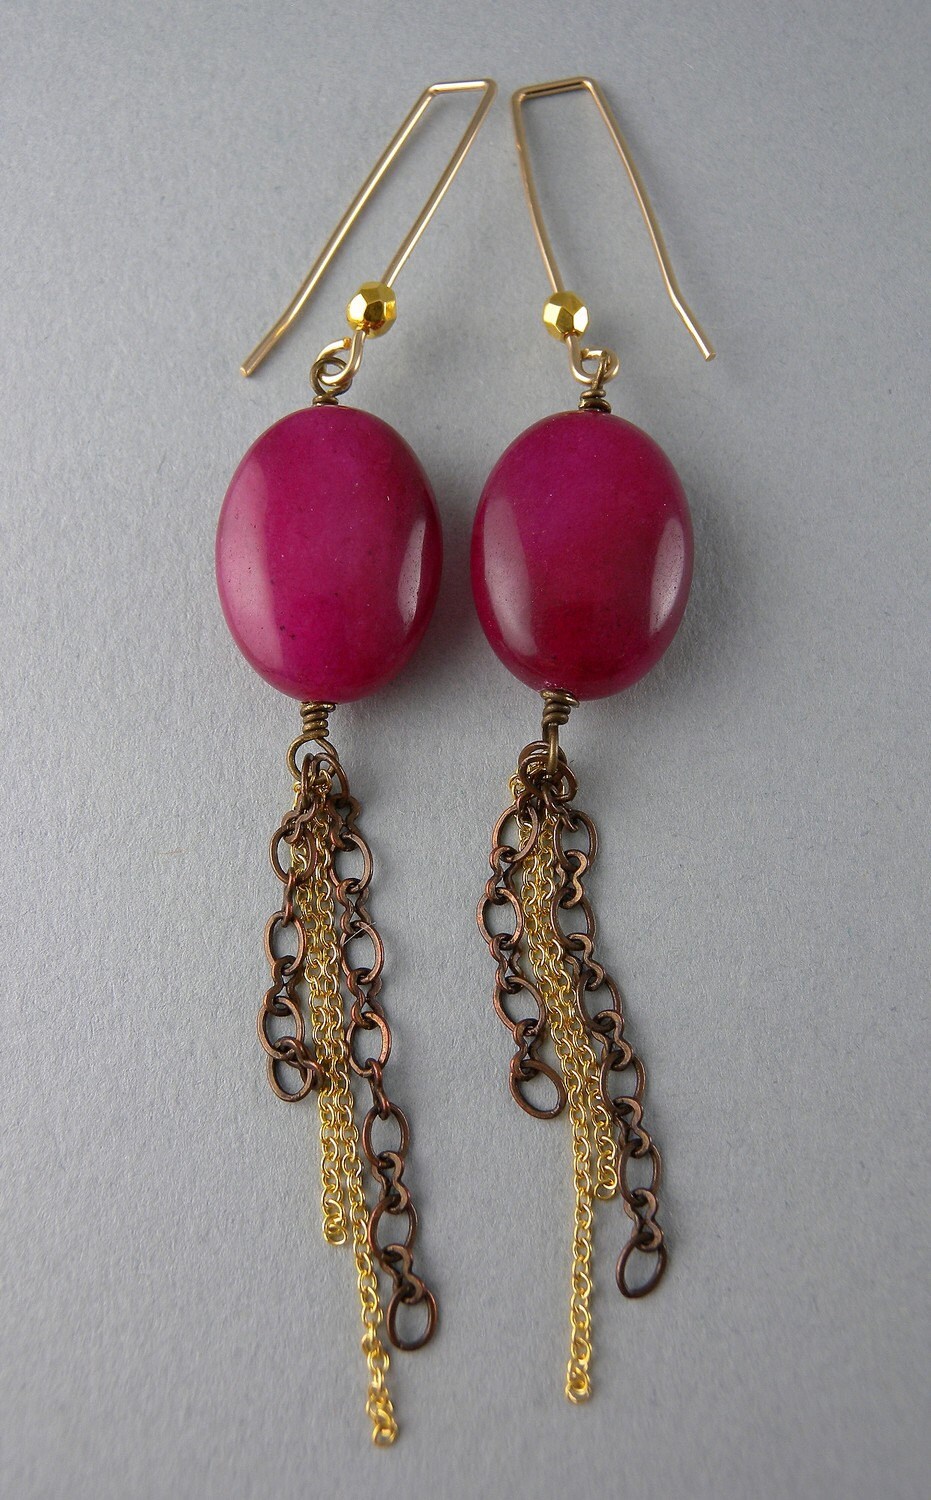 Fuchsia Pink Shoulder Duster Chain Earrings Free USA Shipping - Etsy